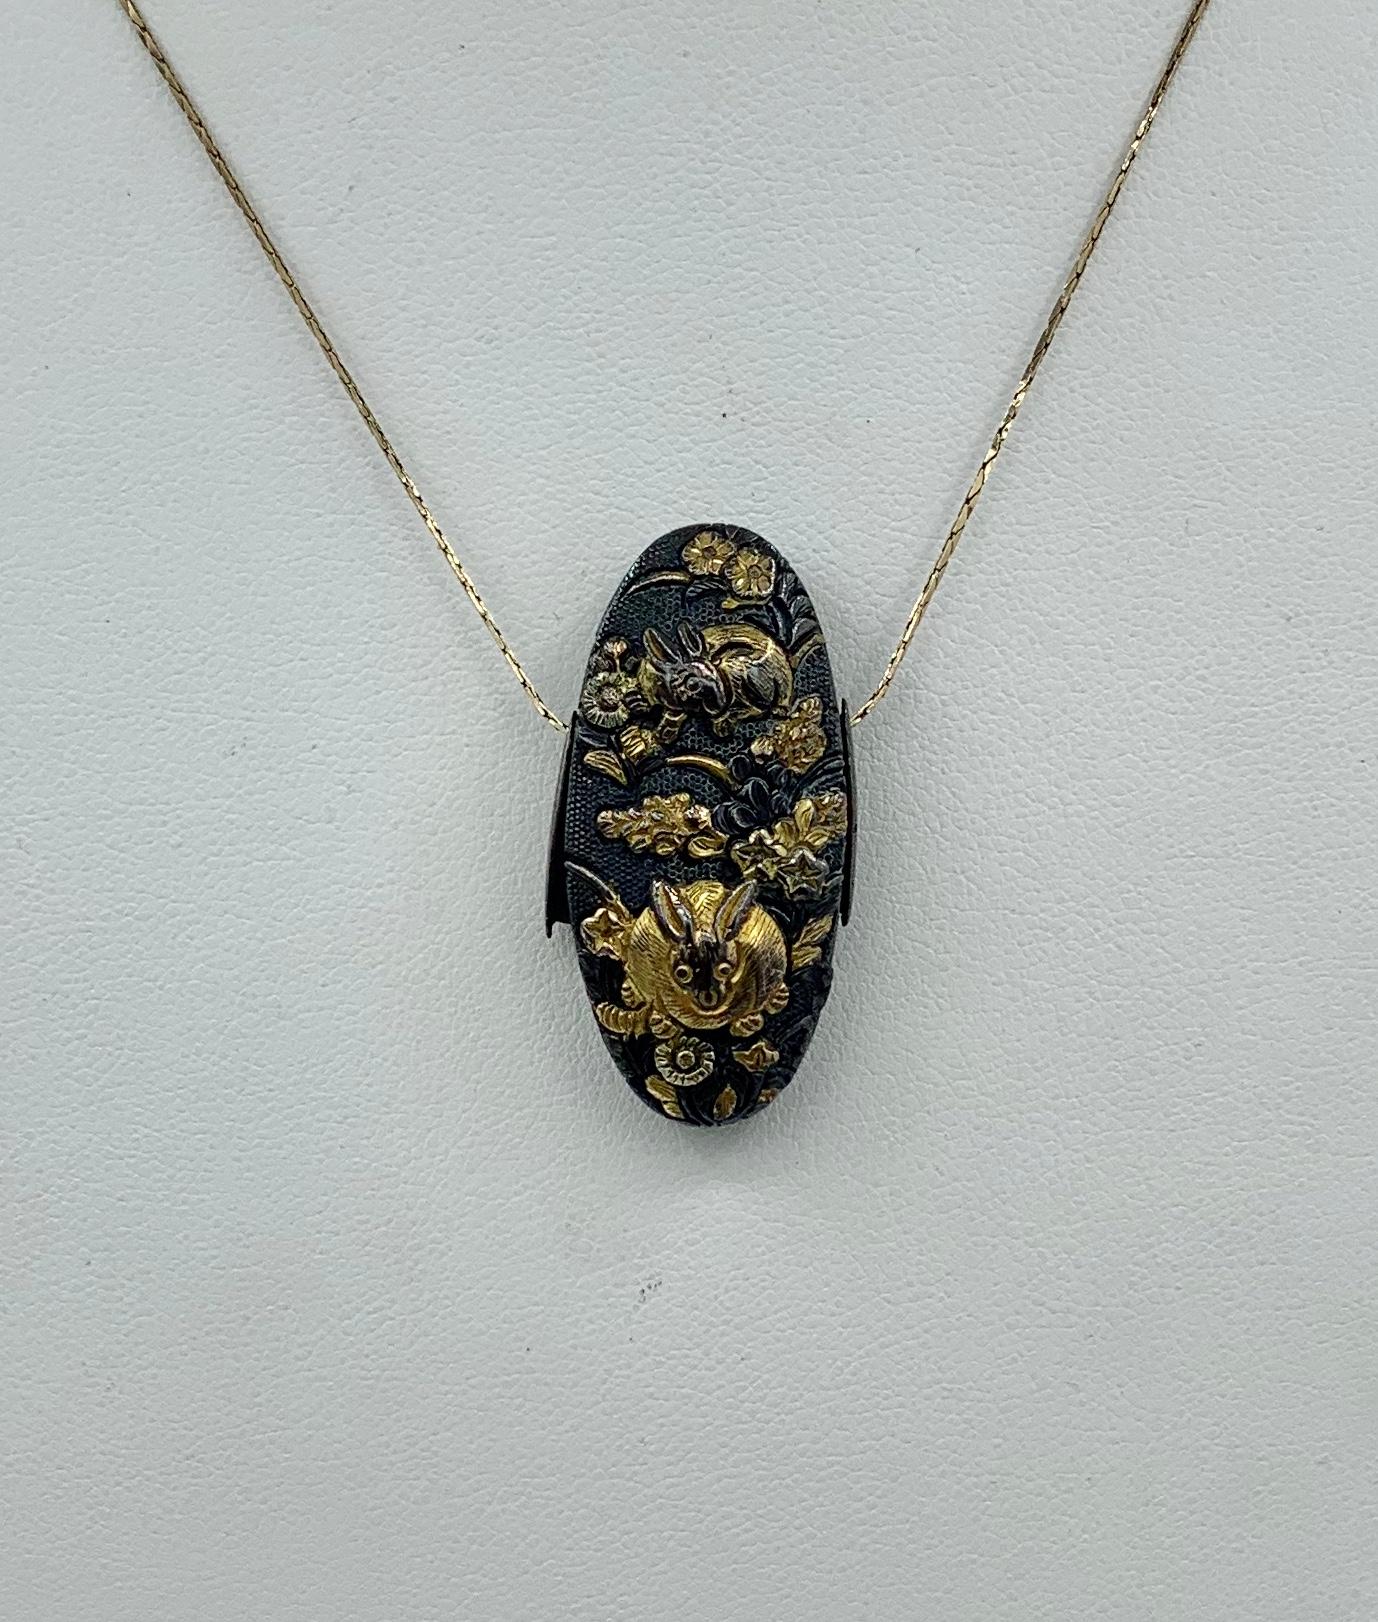 Here we have a very rare Japanese Shakudo Pendant with images of two Bunny Rabbits in a field of Flowers.  The pendant is a stunning example of Shakudo with the grace and proportion of the images and the Japanese aesthetic of asymmetry.  The rabbit